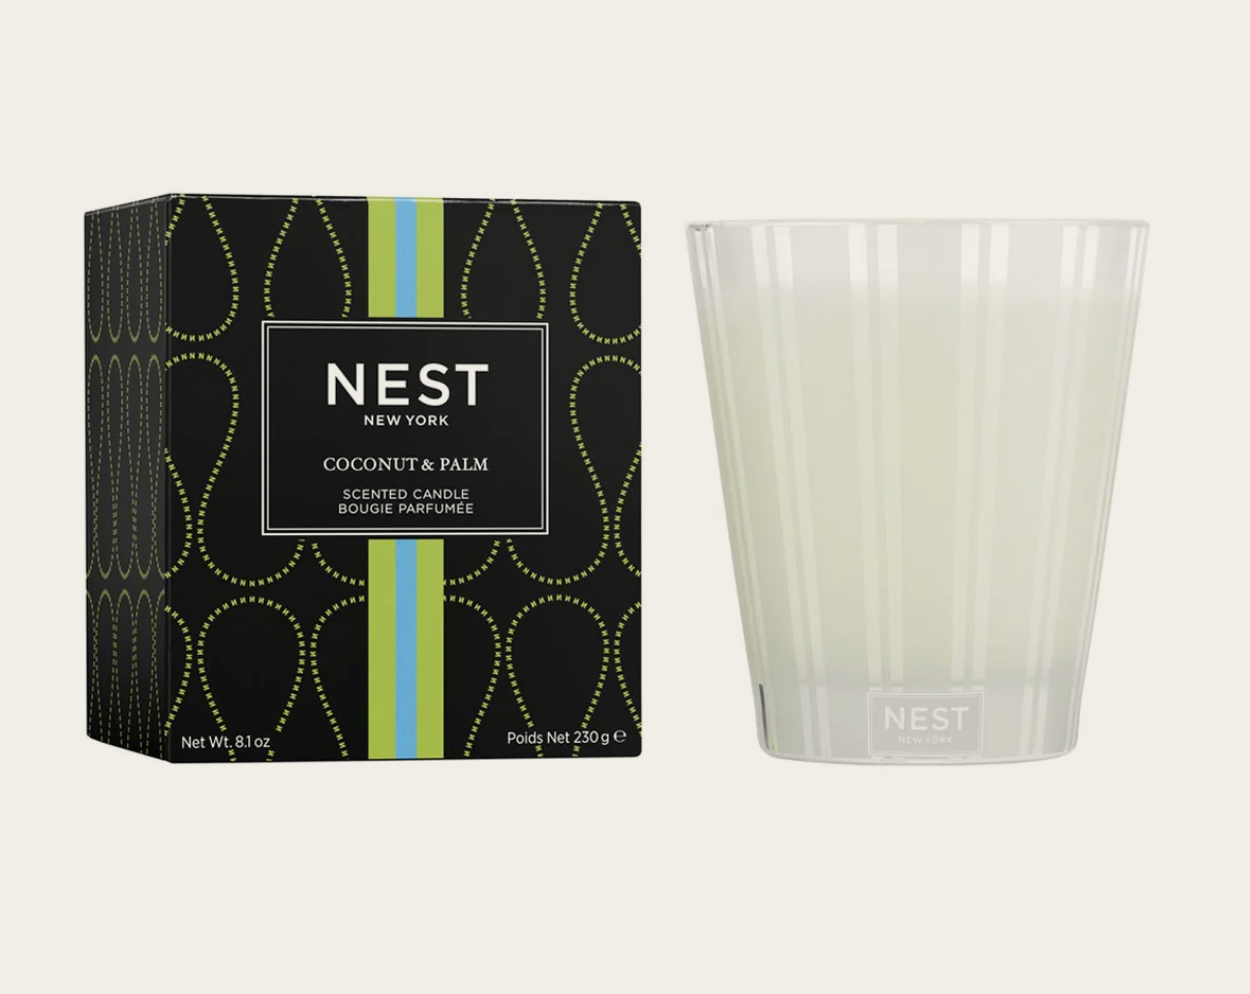 NEST New York Ocean Coconut & Palm Classic Candle